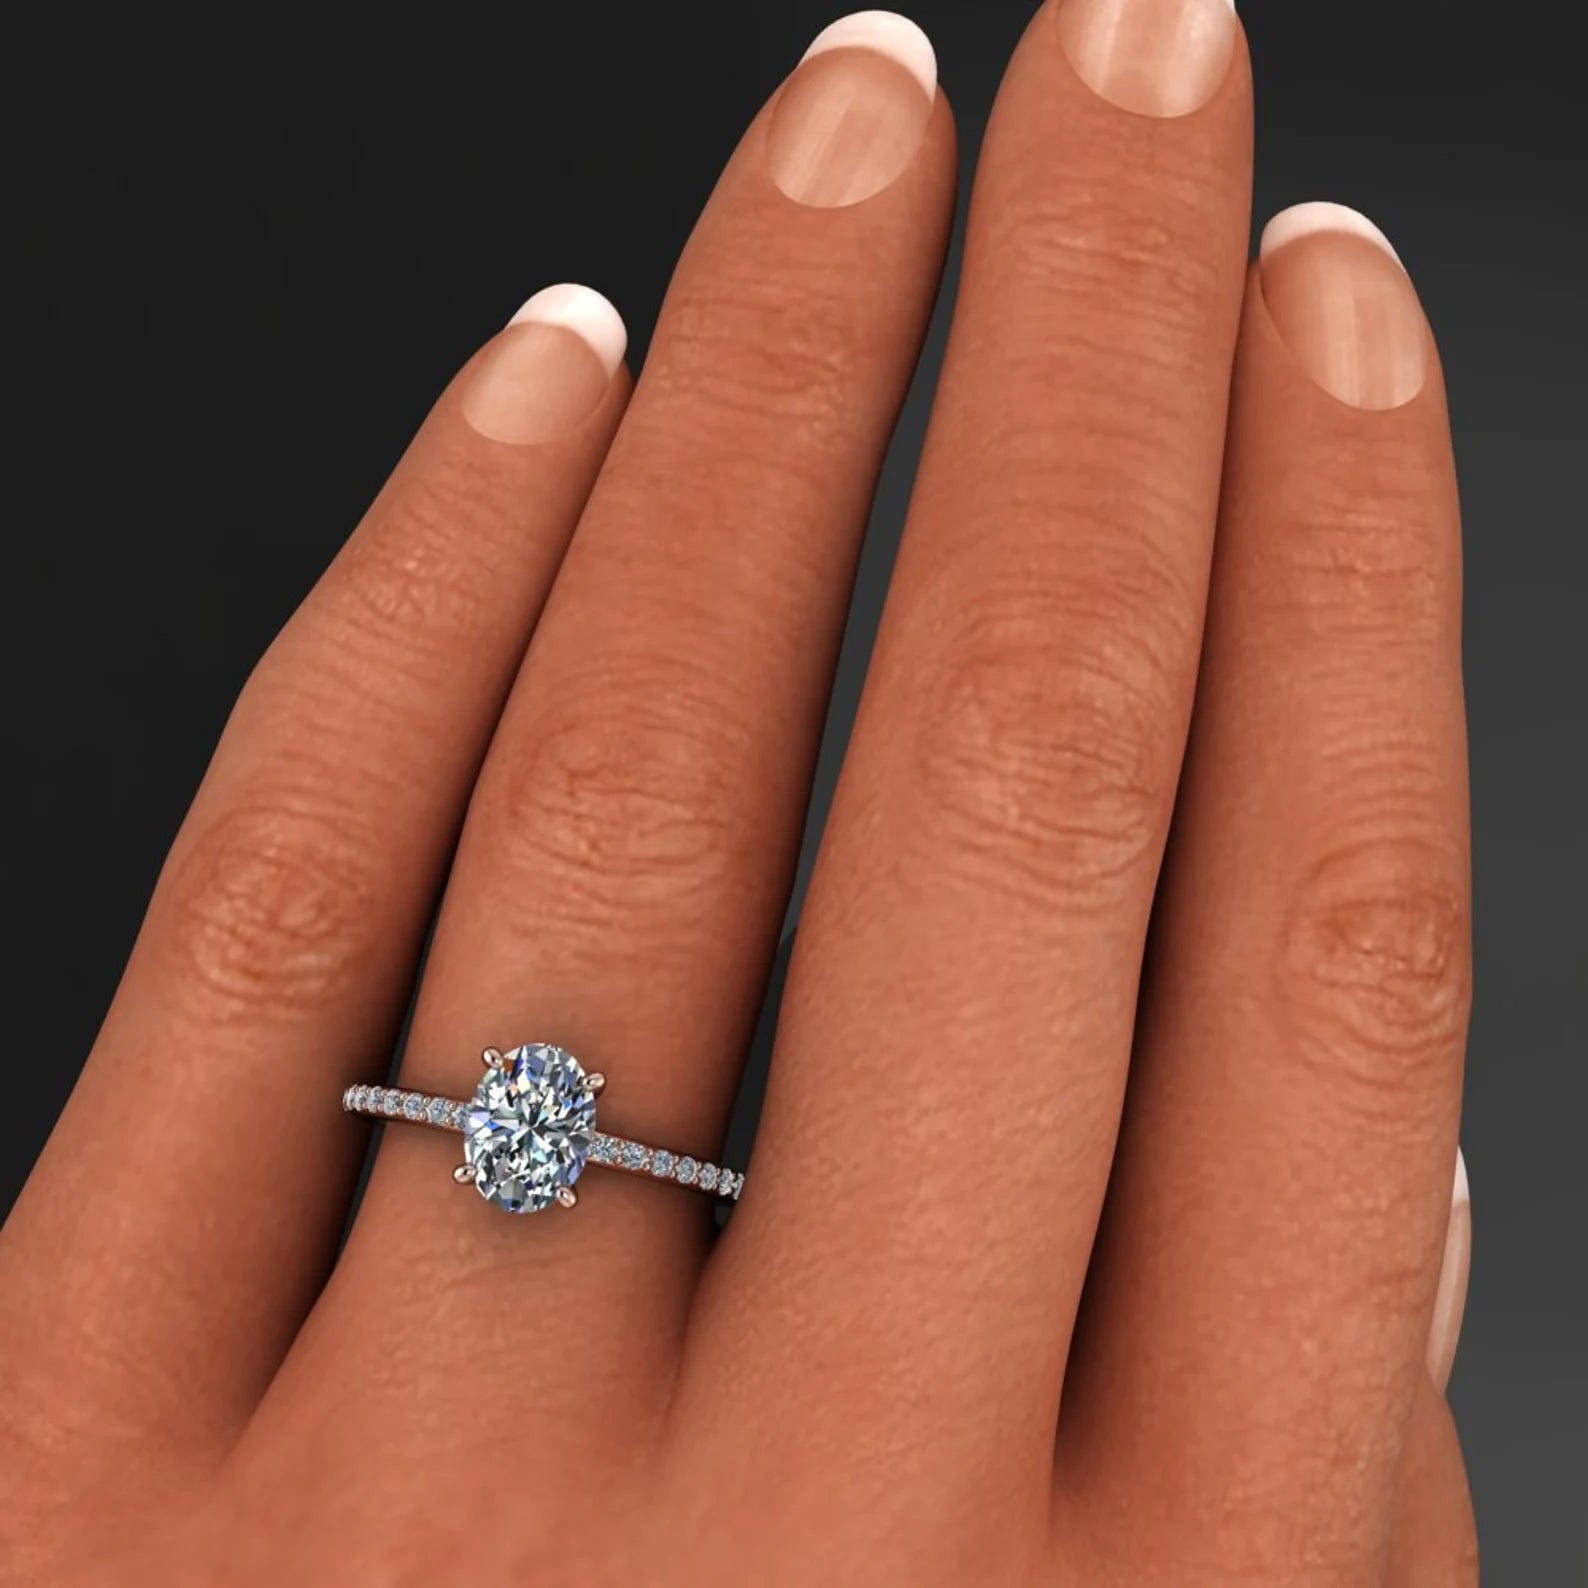 Keyzar · 4 Reasons Not To Buy An Oval Moissanite Engagement Ring